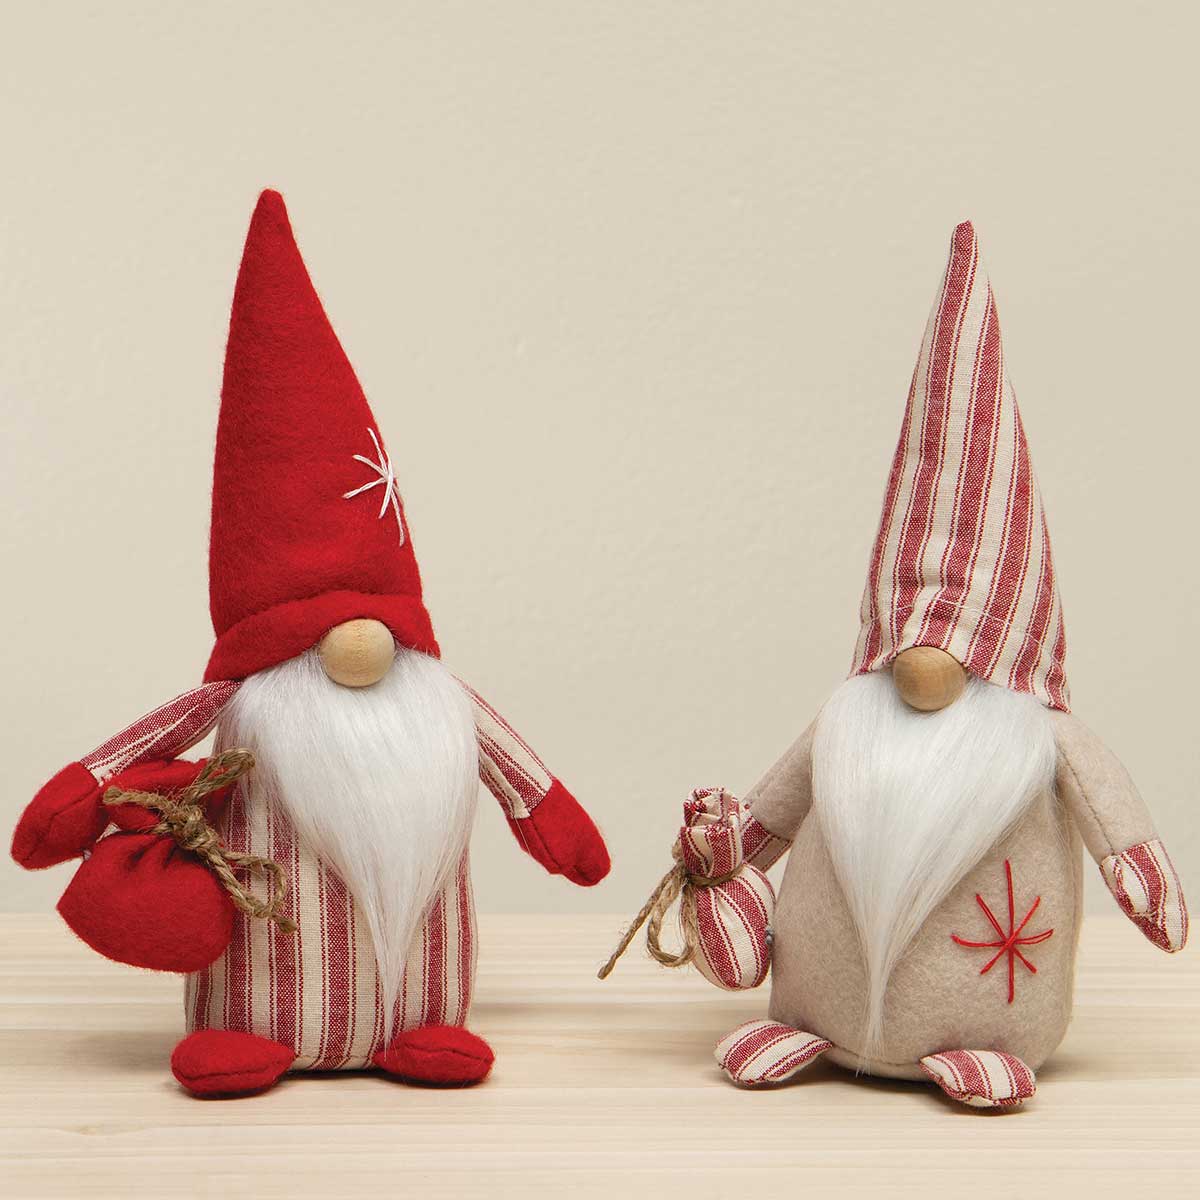 b70 GNOME TICKING BAG 2ASSORTE 3.5IN X 3IN X 8IN POLYESTER